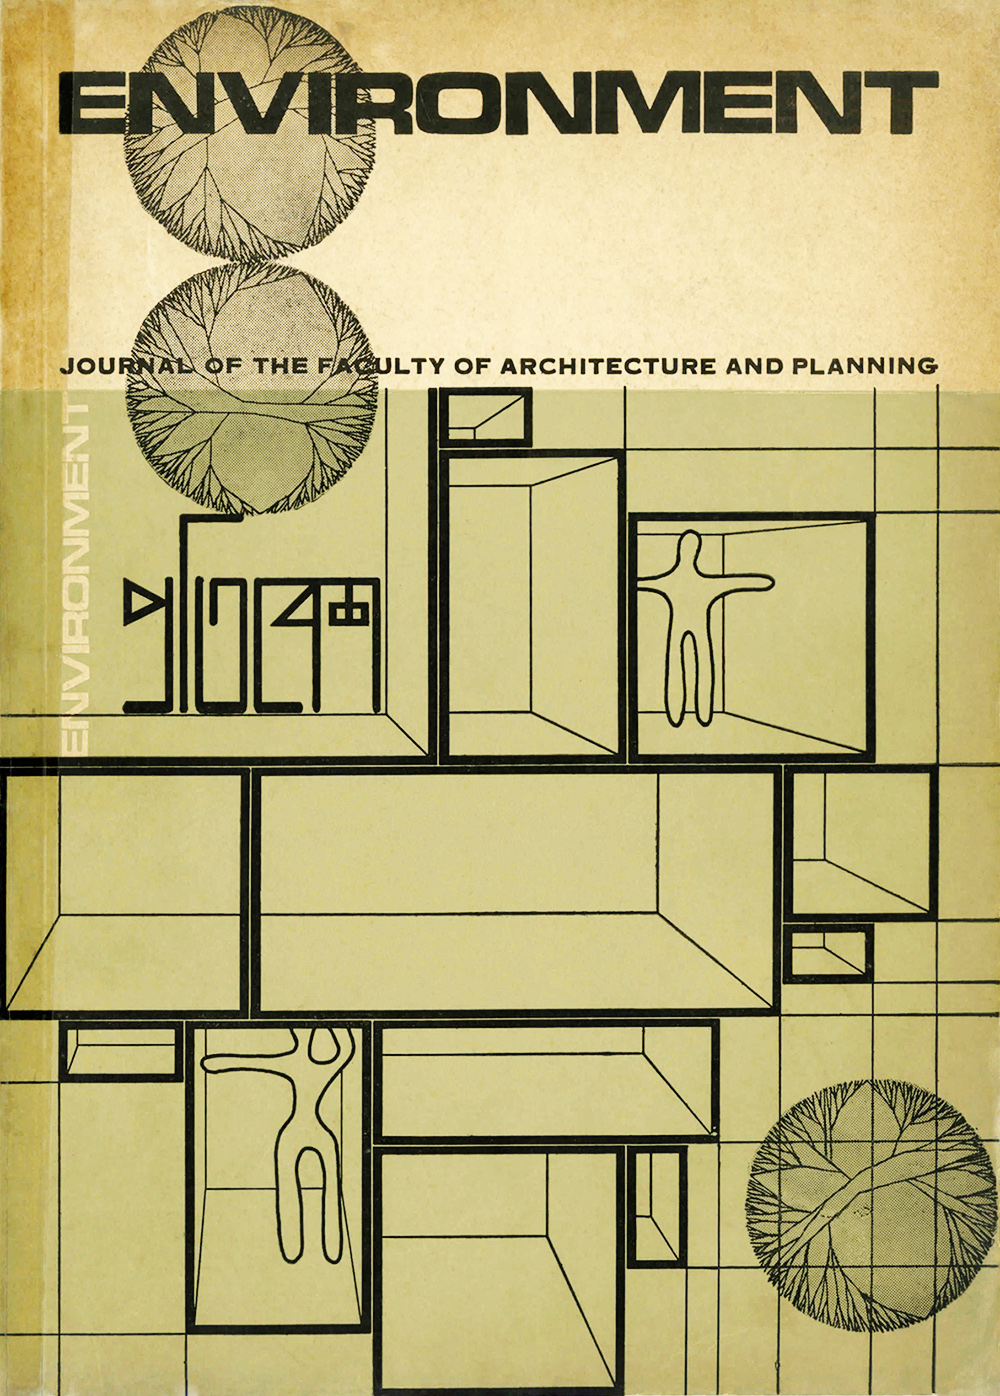 Cover image of Protibesh Vol-01 No-01 June-1977 - Journal of the Department of Architecture, BUET